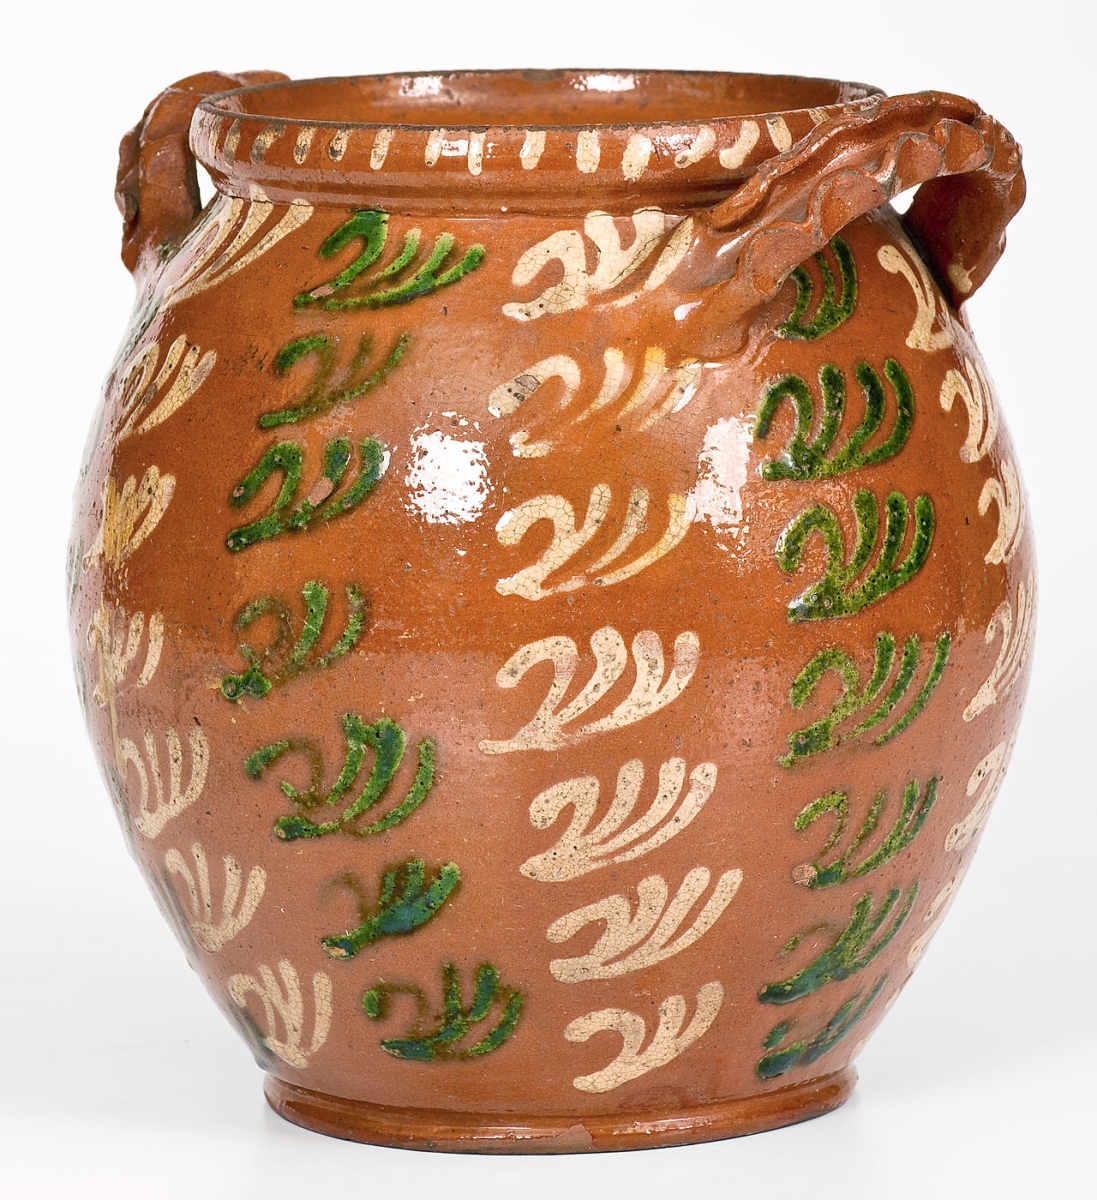 A redware jar that related to one in the collection of the Philadelphia Museum of Art sold for $132,000 above a $12,000 high estimate. The jar was attributed to Christian Klinker of Nockamixon Township, Bucks County, Penn. Circa 1773-98, Mark Zipp said it’s the distinct handles that relate to Klinker’s work. “The handles are well-done, the crimping is bizarre and very distinctive. They’re unmistakable,” he said. The work came from the collection of Lewis Fenley “Dusty” Parker, who had purchased it at Christie’s in 1999 from the John Gordon collection.